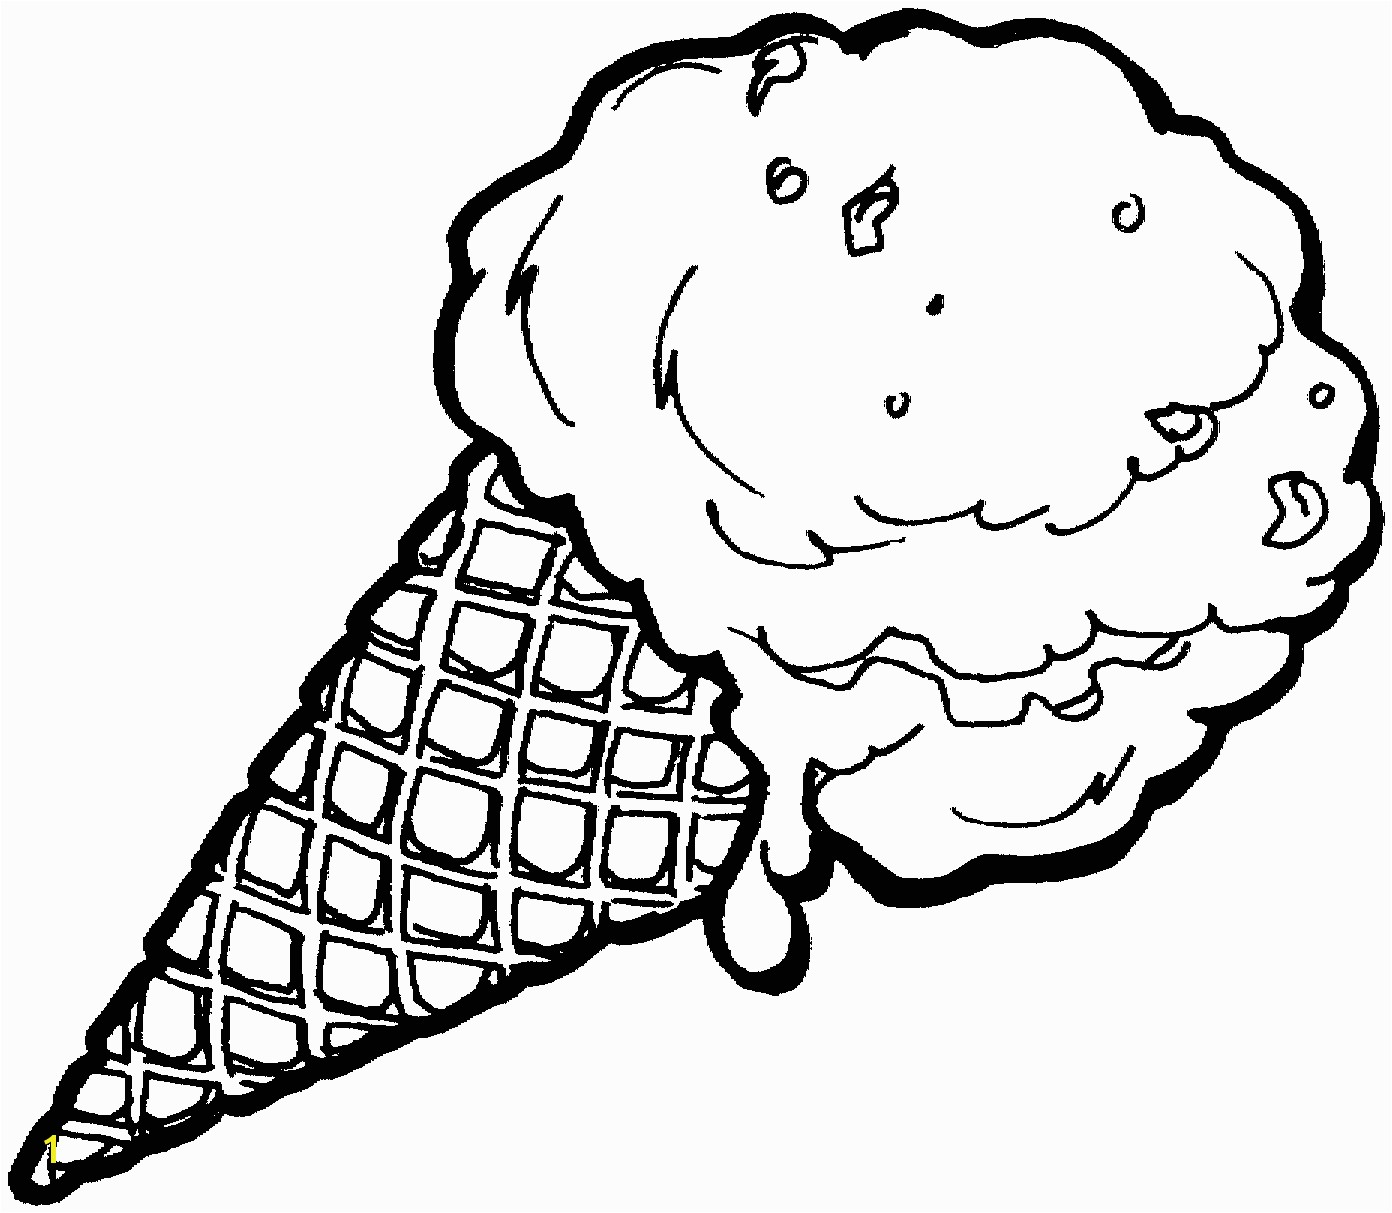 Ice Cream Cone Coloring Pages Ice Cream Coloring Pages with Waffle Cone